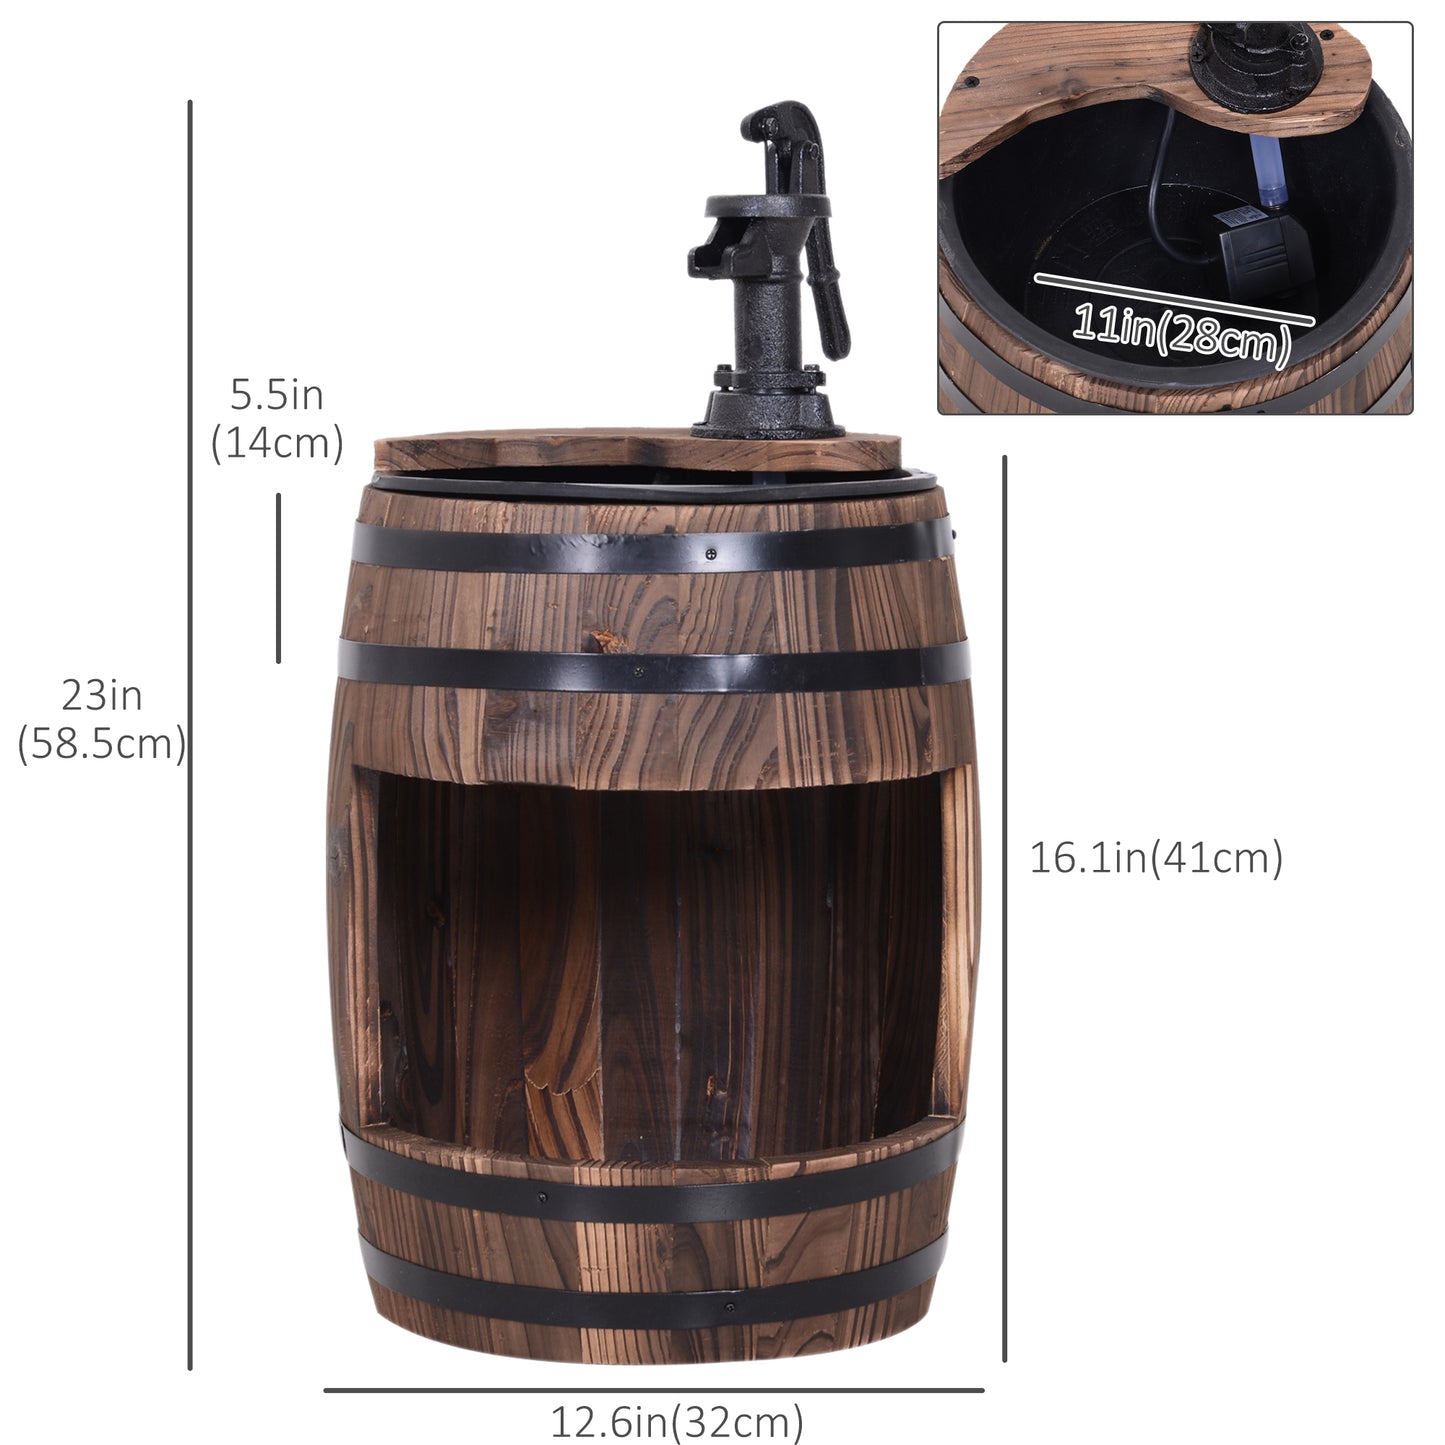 Wooden Outdoor Fountain, Electrical Barrel Waterfall with 3600r/min Speed Pump for Patio, Backyard, Carbonized at Gallery Canada